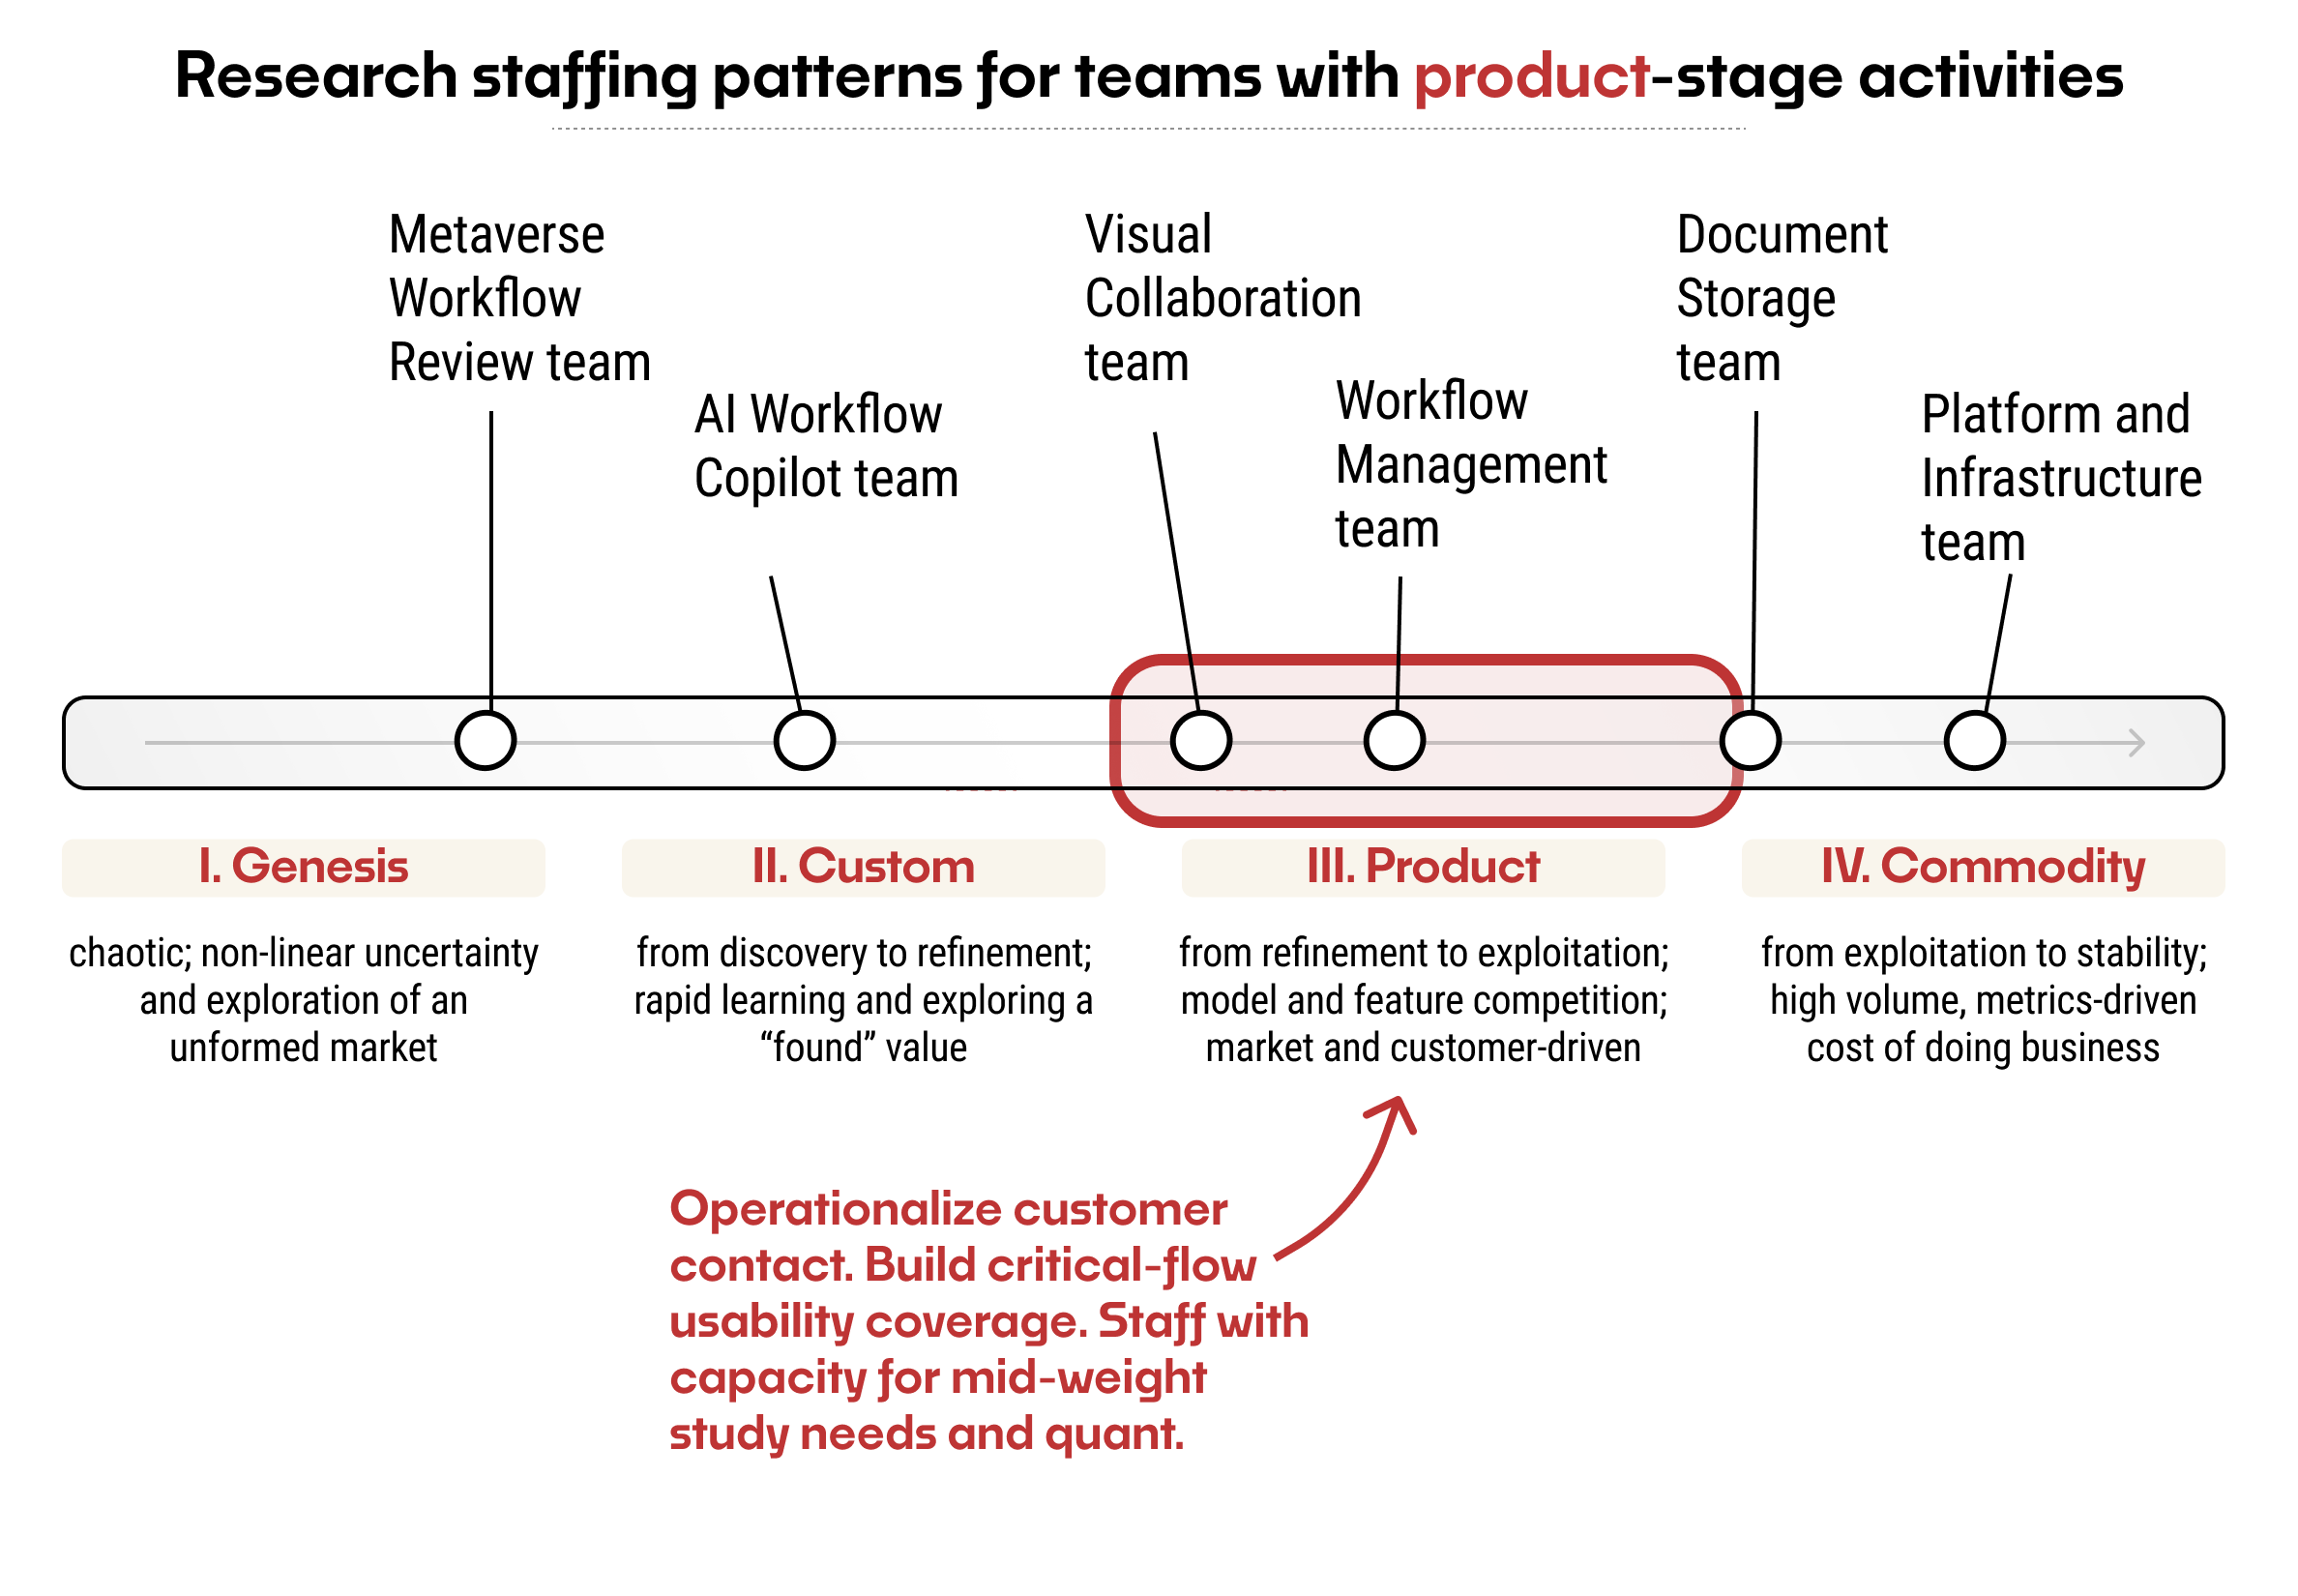 Profiling Product Teams & Predicting Research Needs